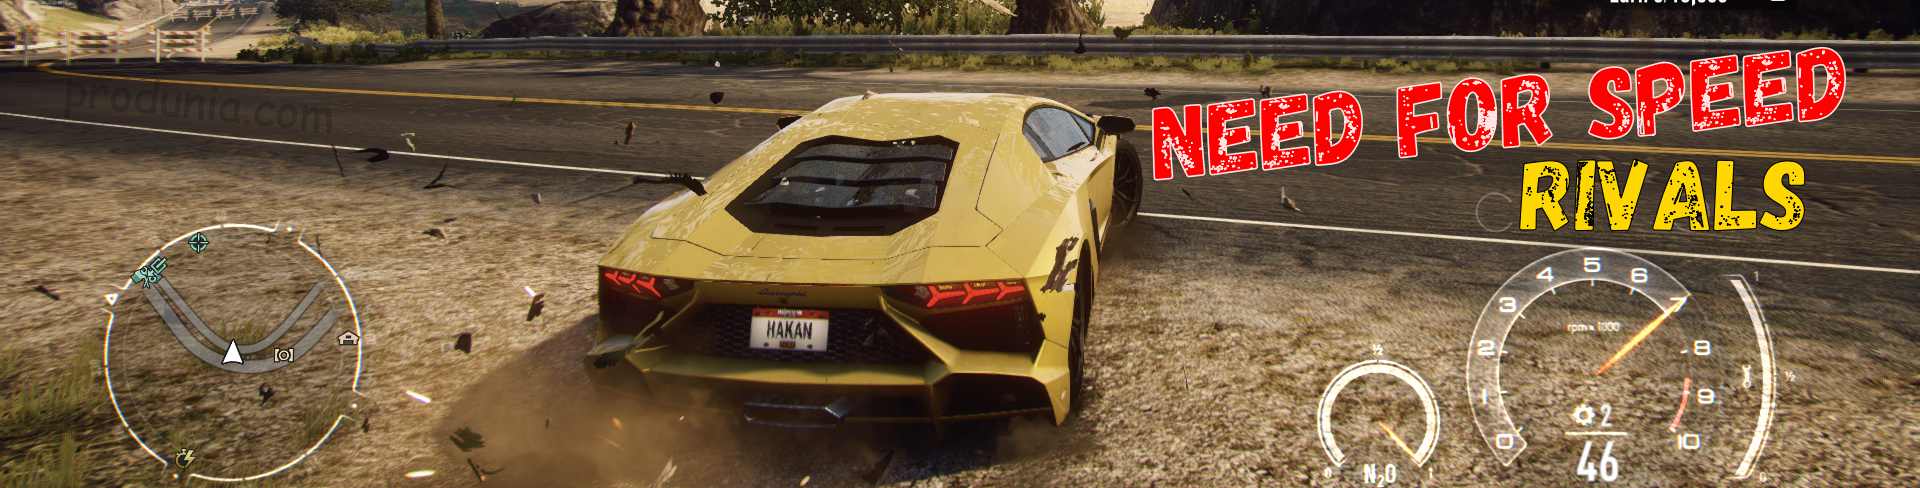 Nfs game free download for windows 10 64-bit